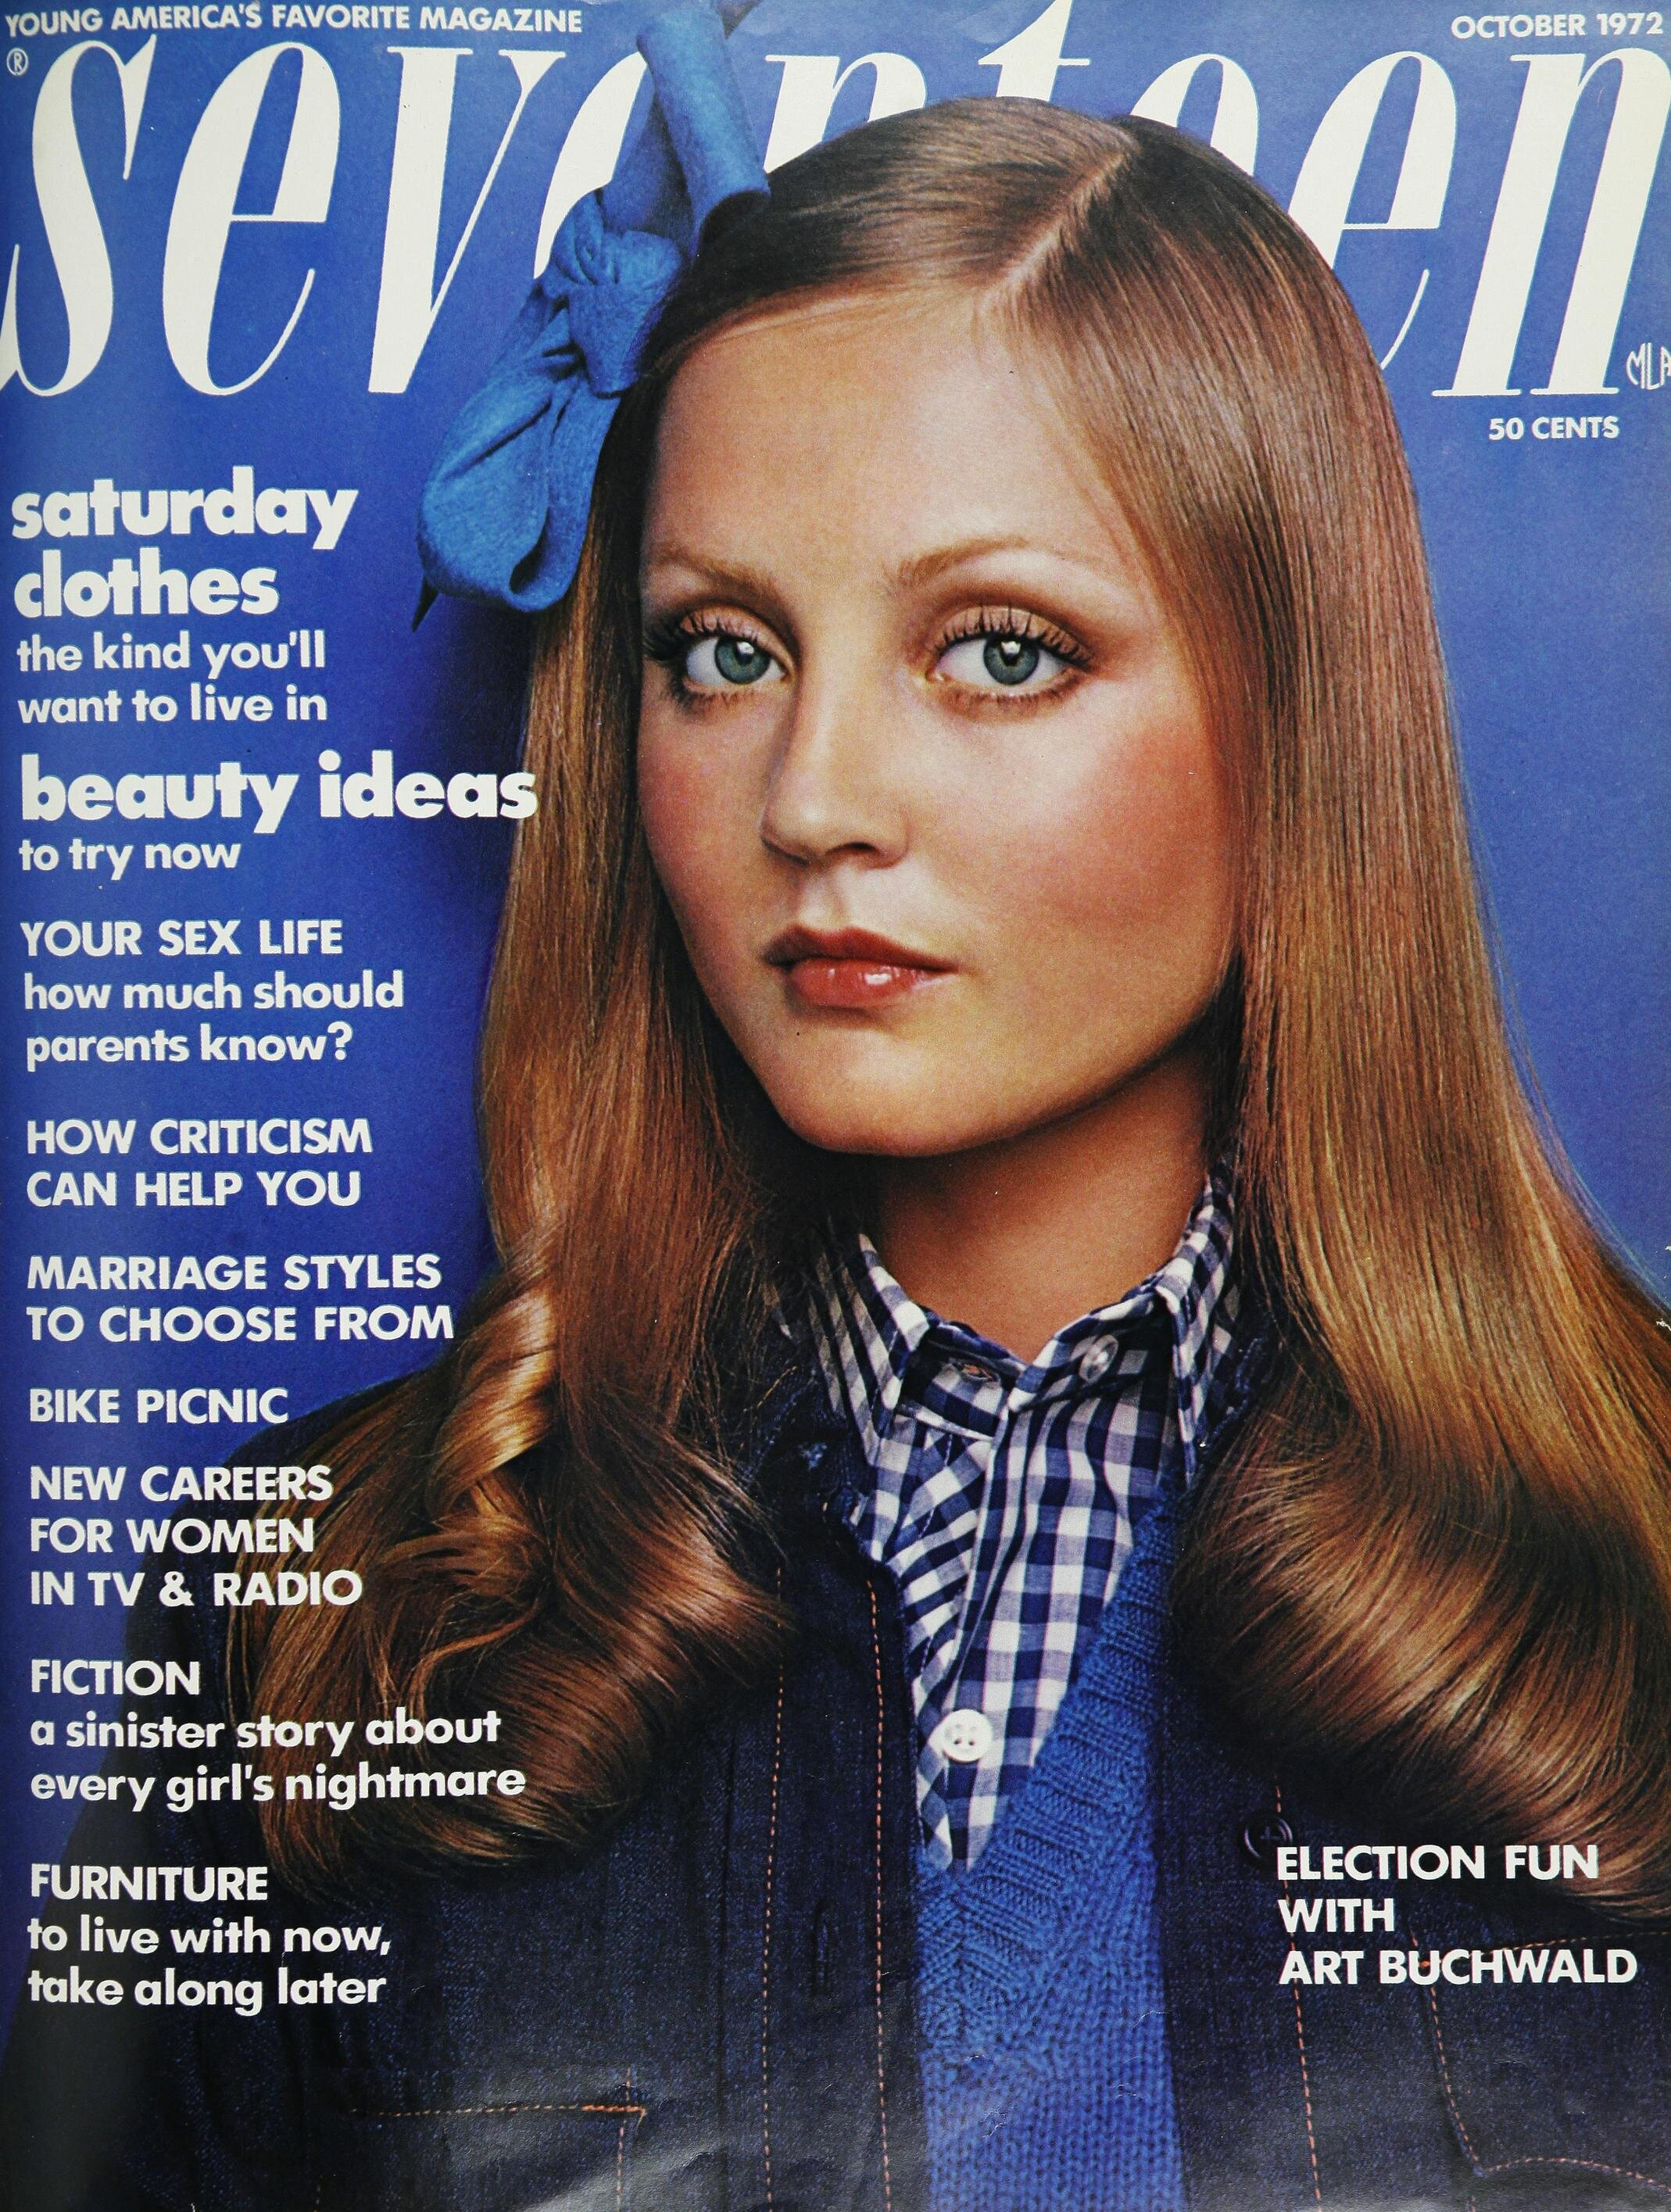 Ingrid Boulting on the cover of Seventeen, October 1972. Photographed by Carmen Schiavone.